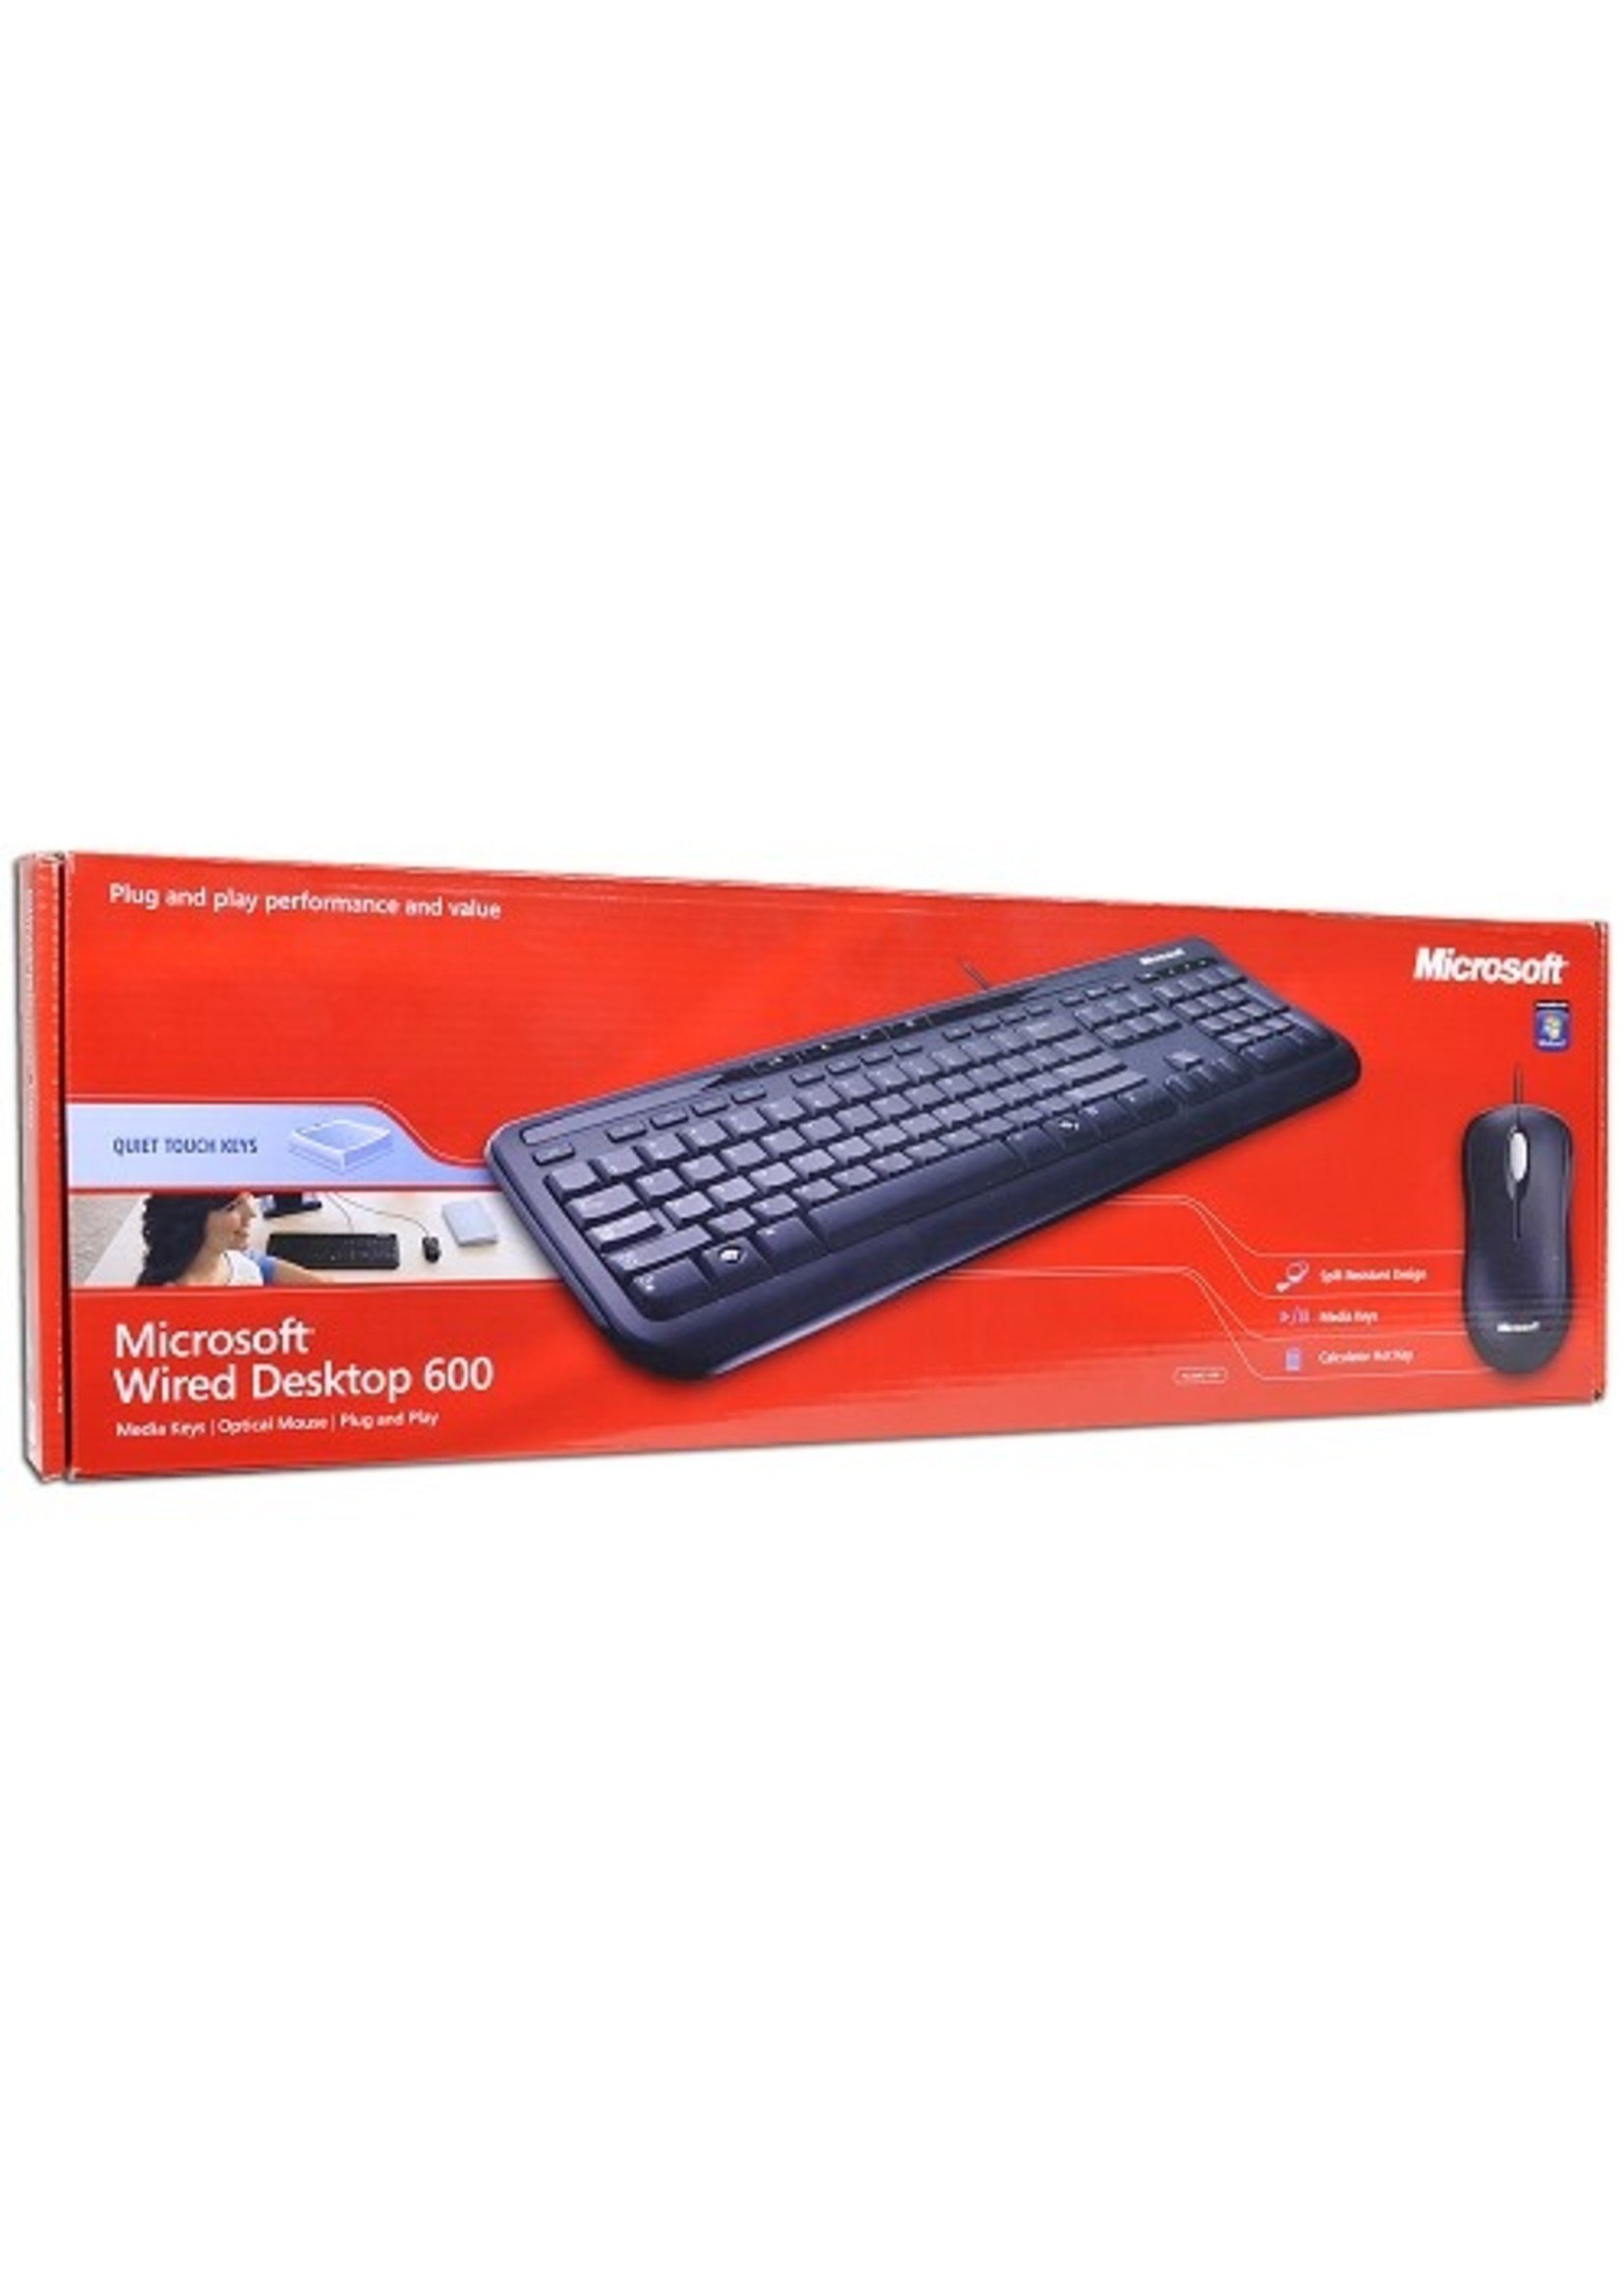 MS 600 Keyboard-Mouse Combo